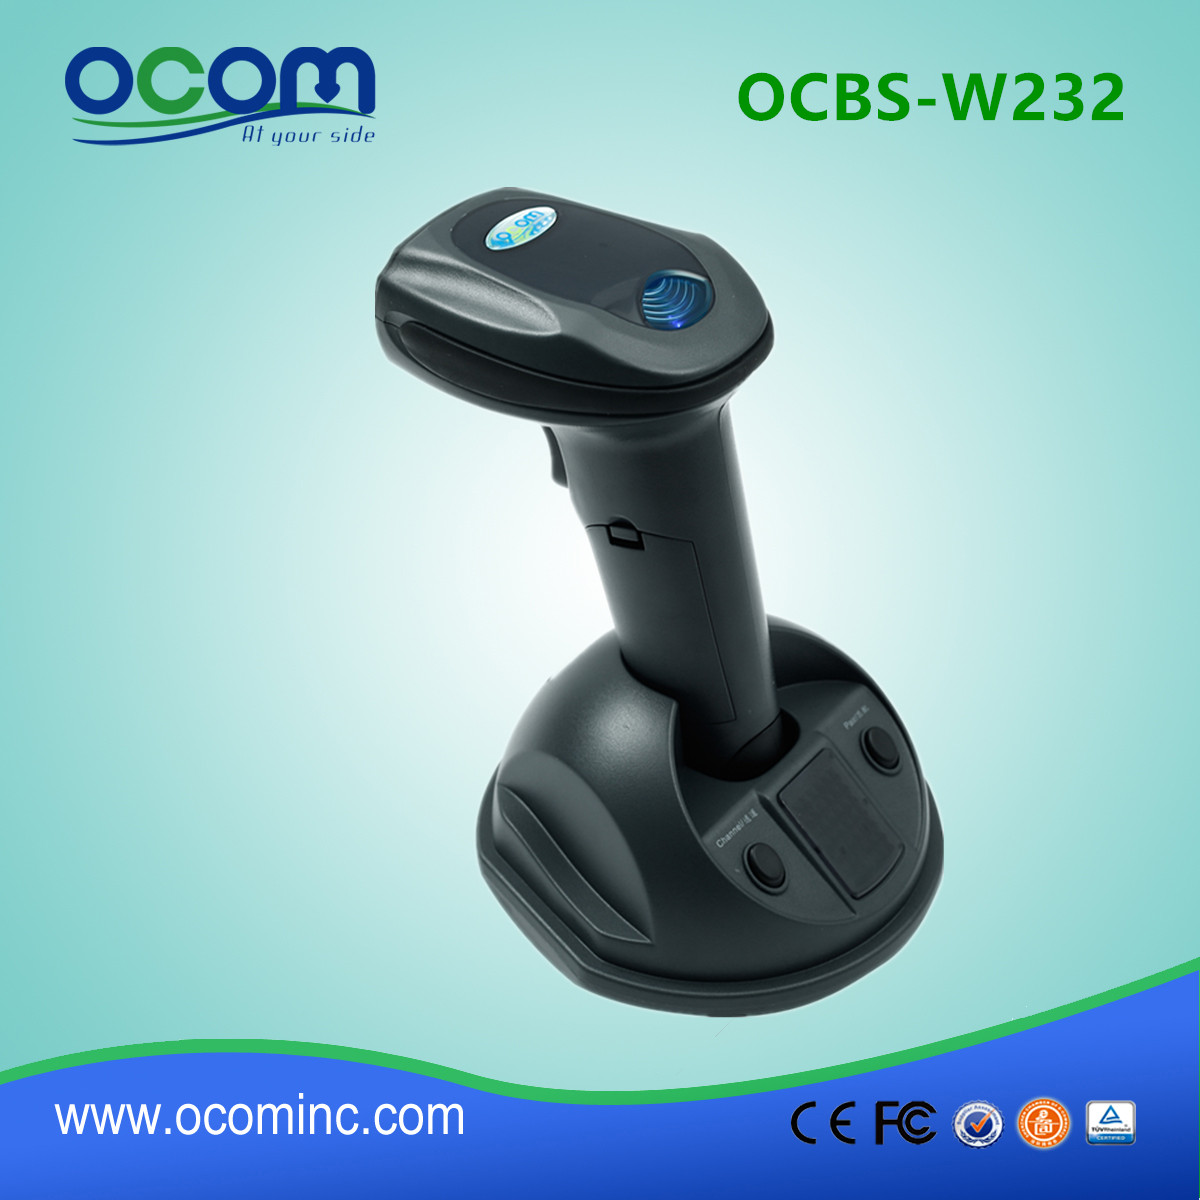 OCBS-W232-Wireless Handheld 2D barcode scanner with Bluetooth and 433MHz with cradle